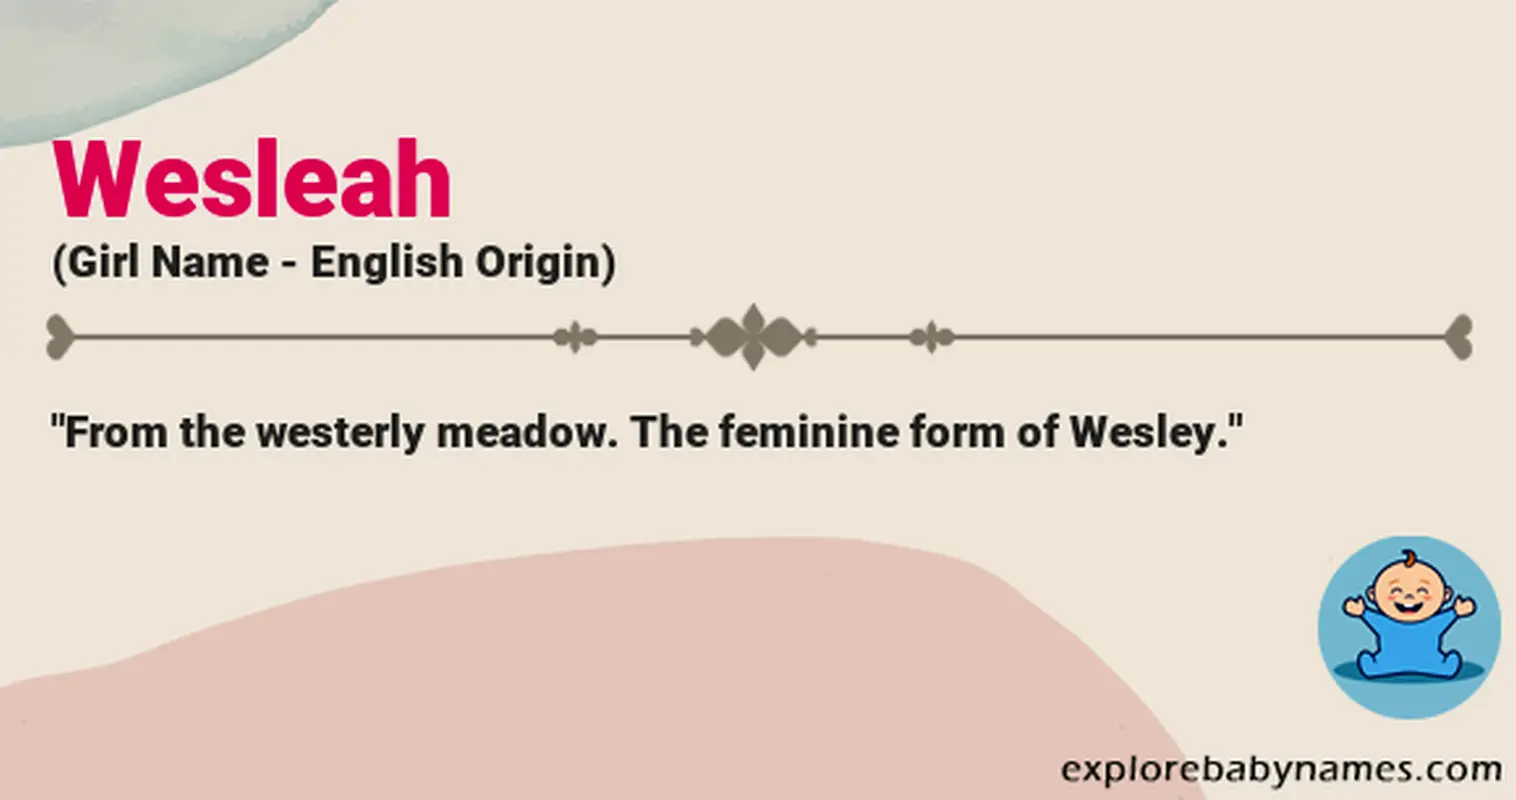 Meaning of Wesleah